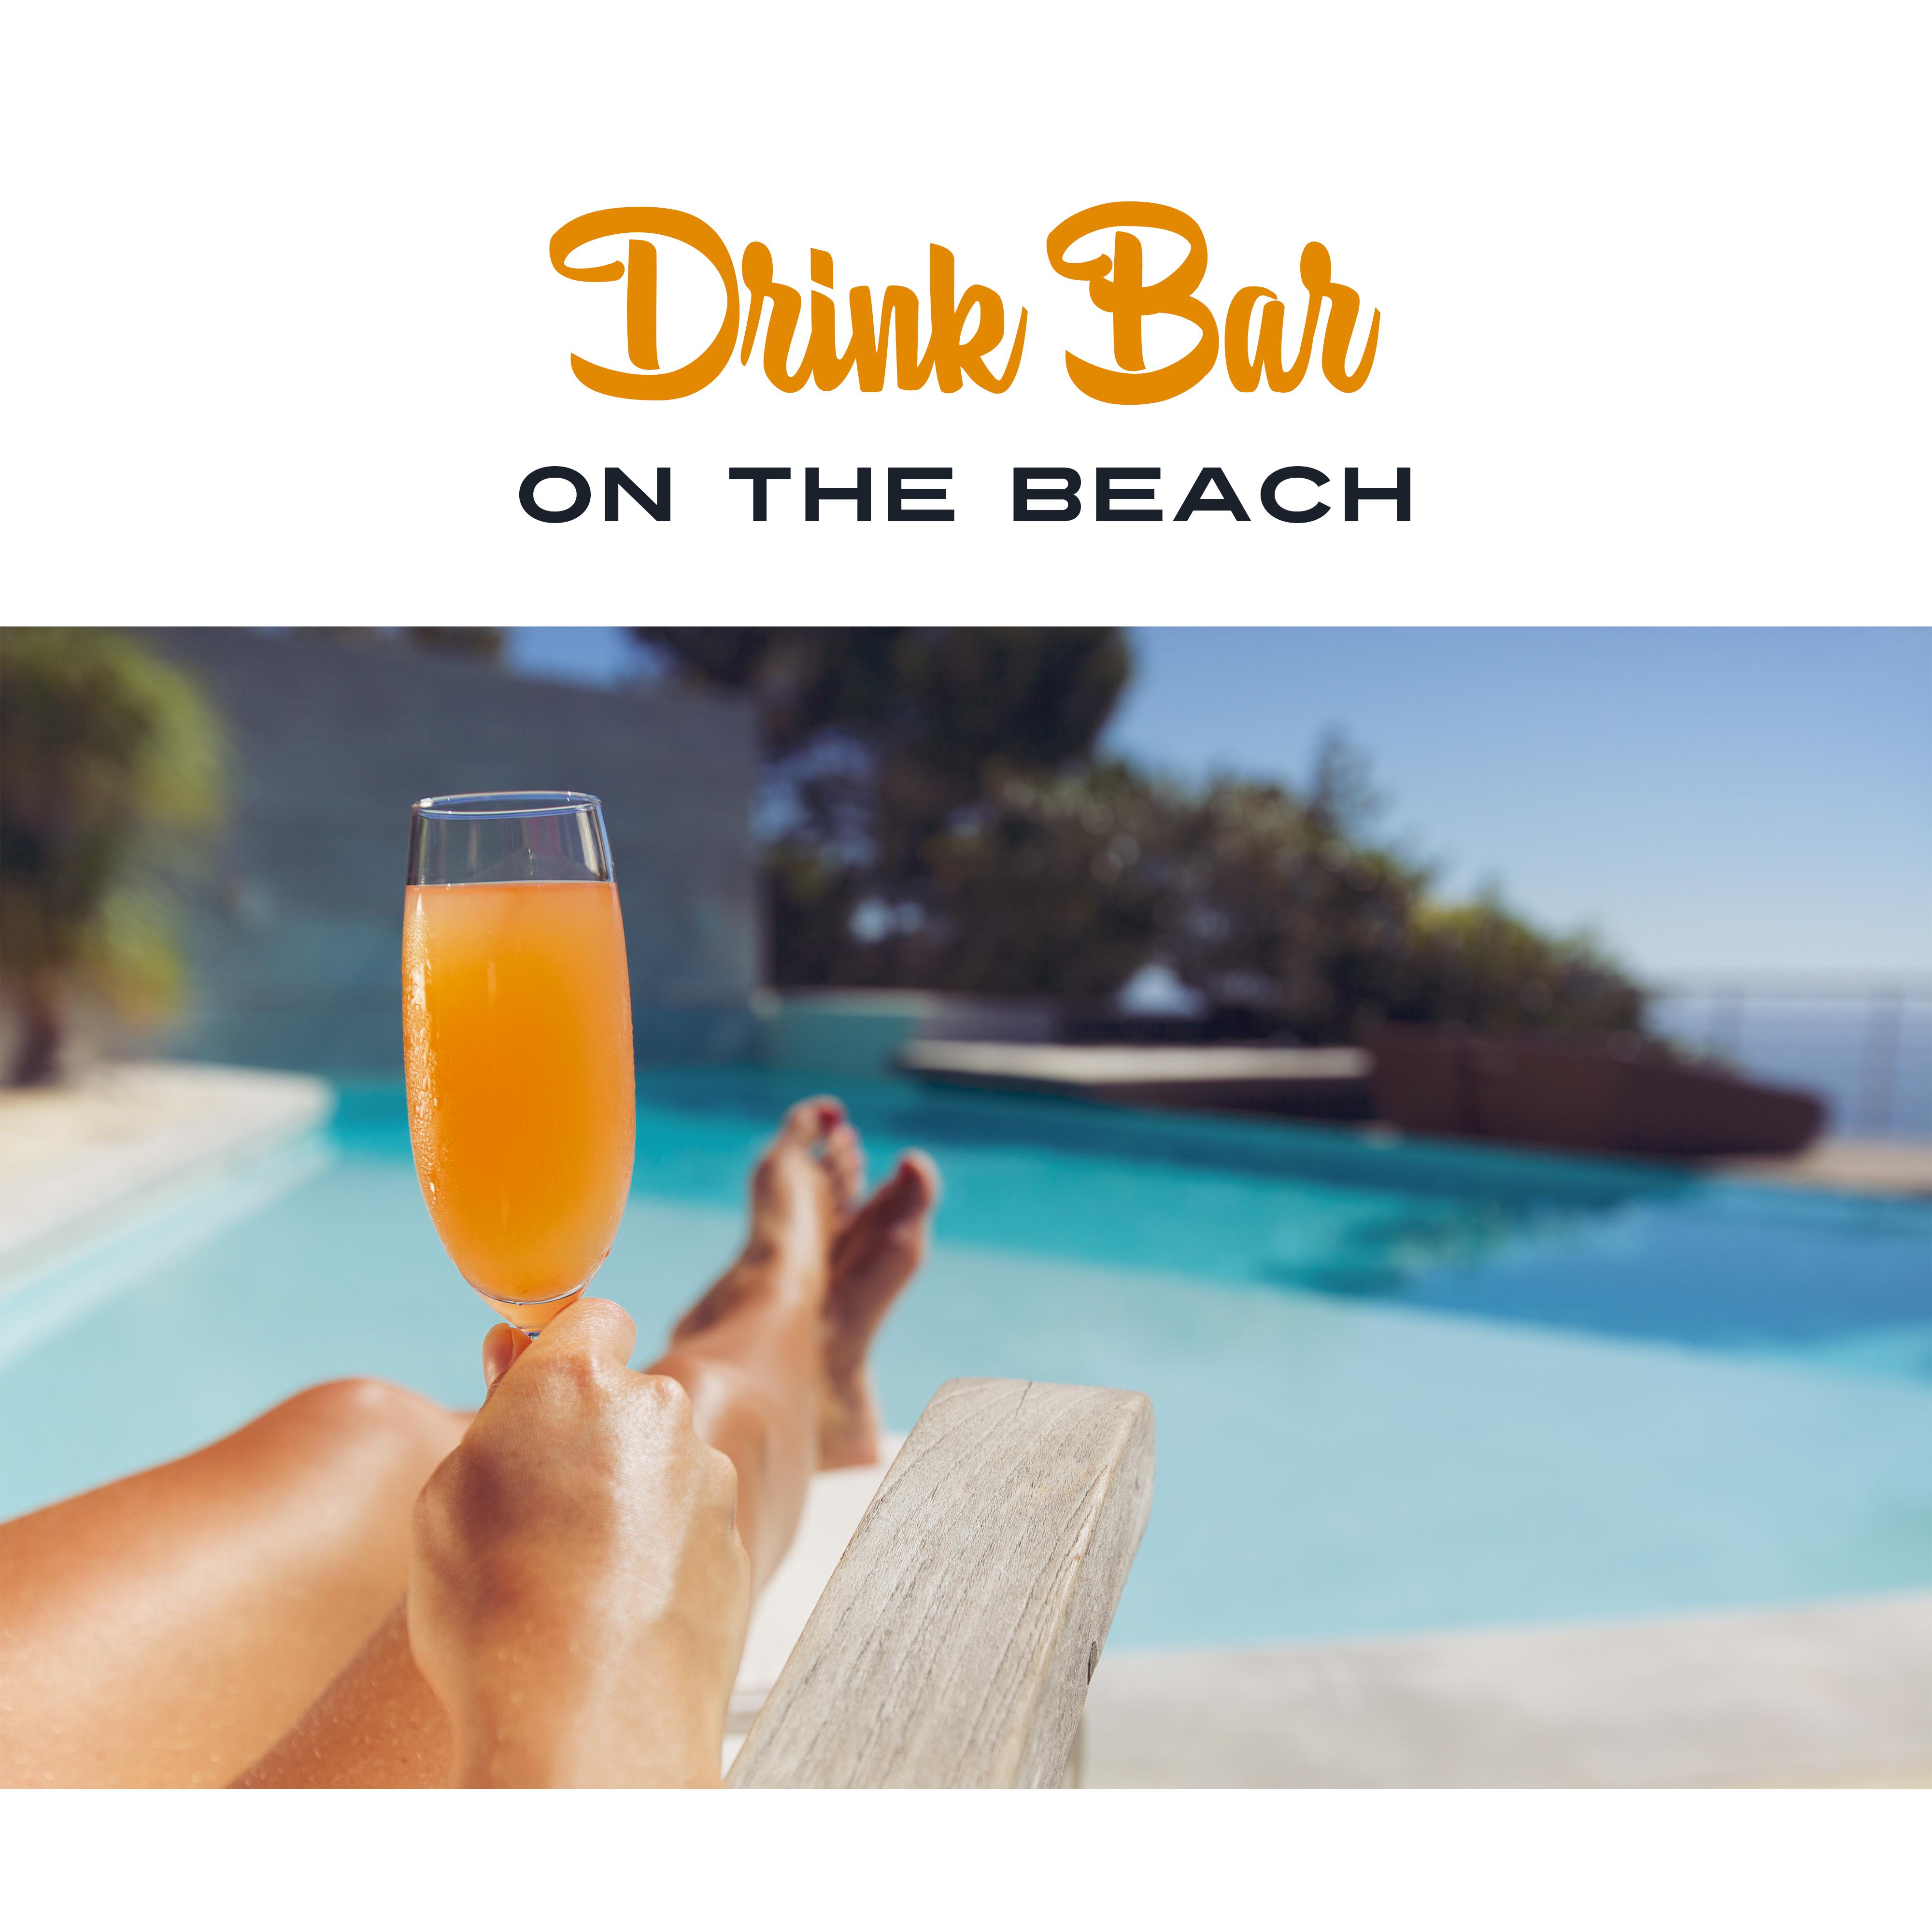 Drink Bar on the Beach  Cafe Chillout, Holiday Under Palms, Beach Chill, Sounds of Sea, Relaxing Music, Peaceful Mind, Holiday Chill Out Music